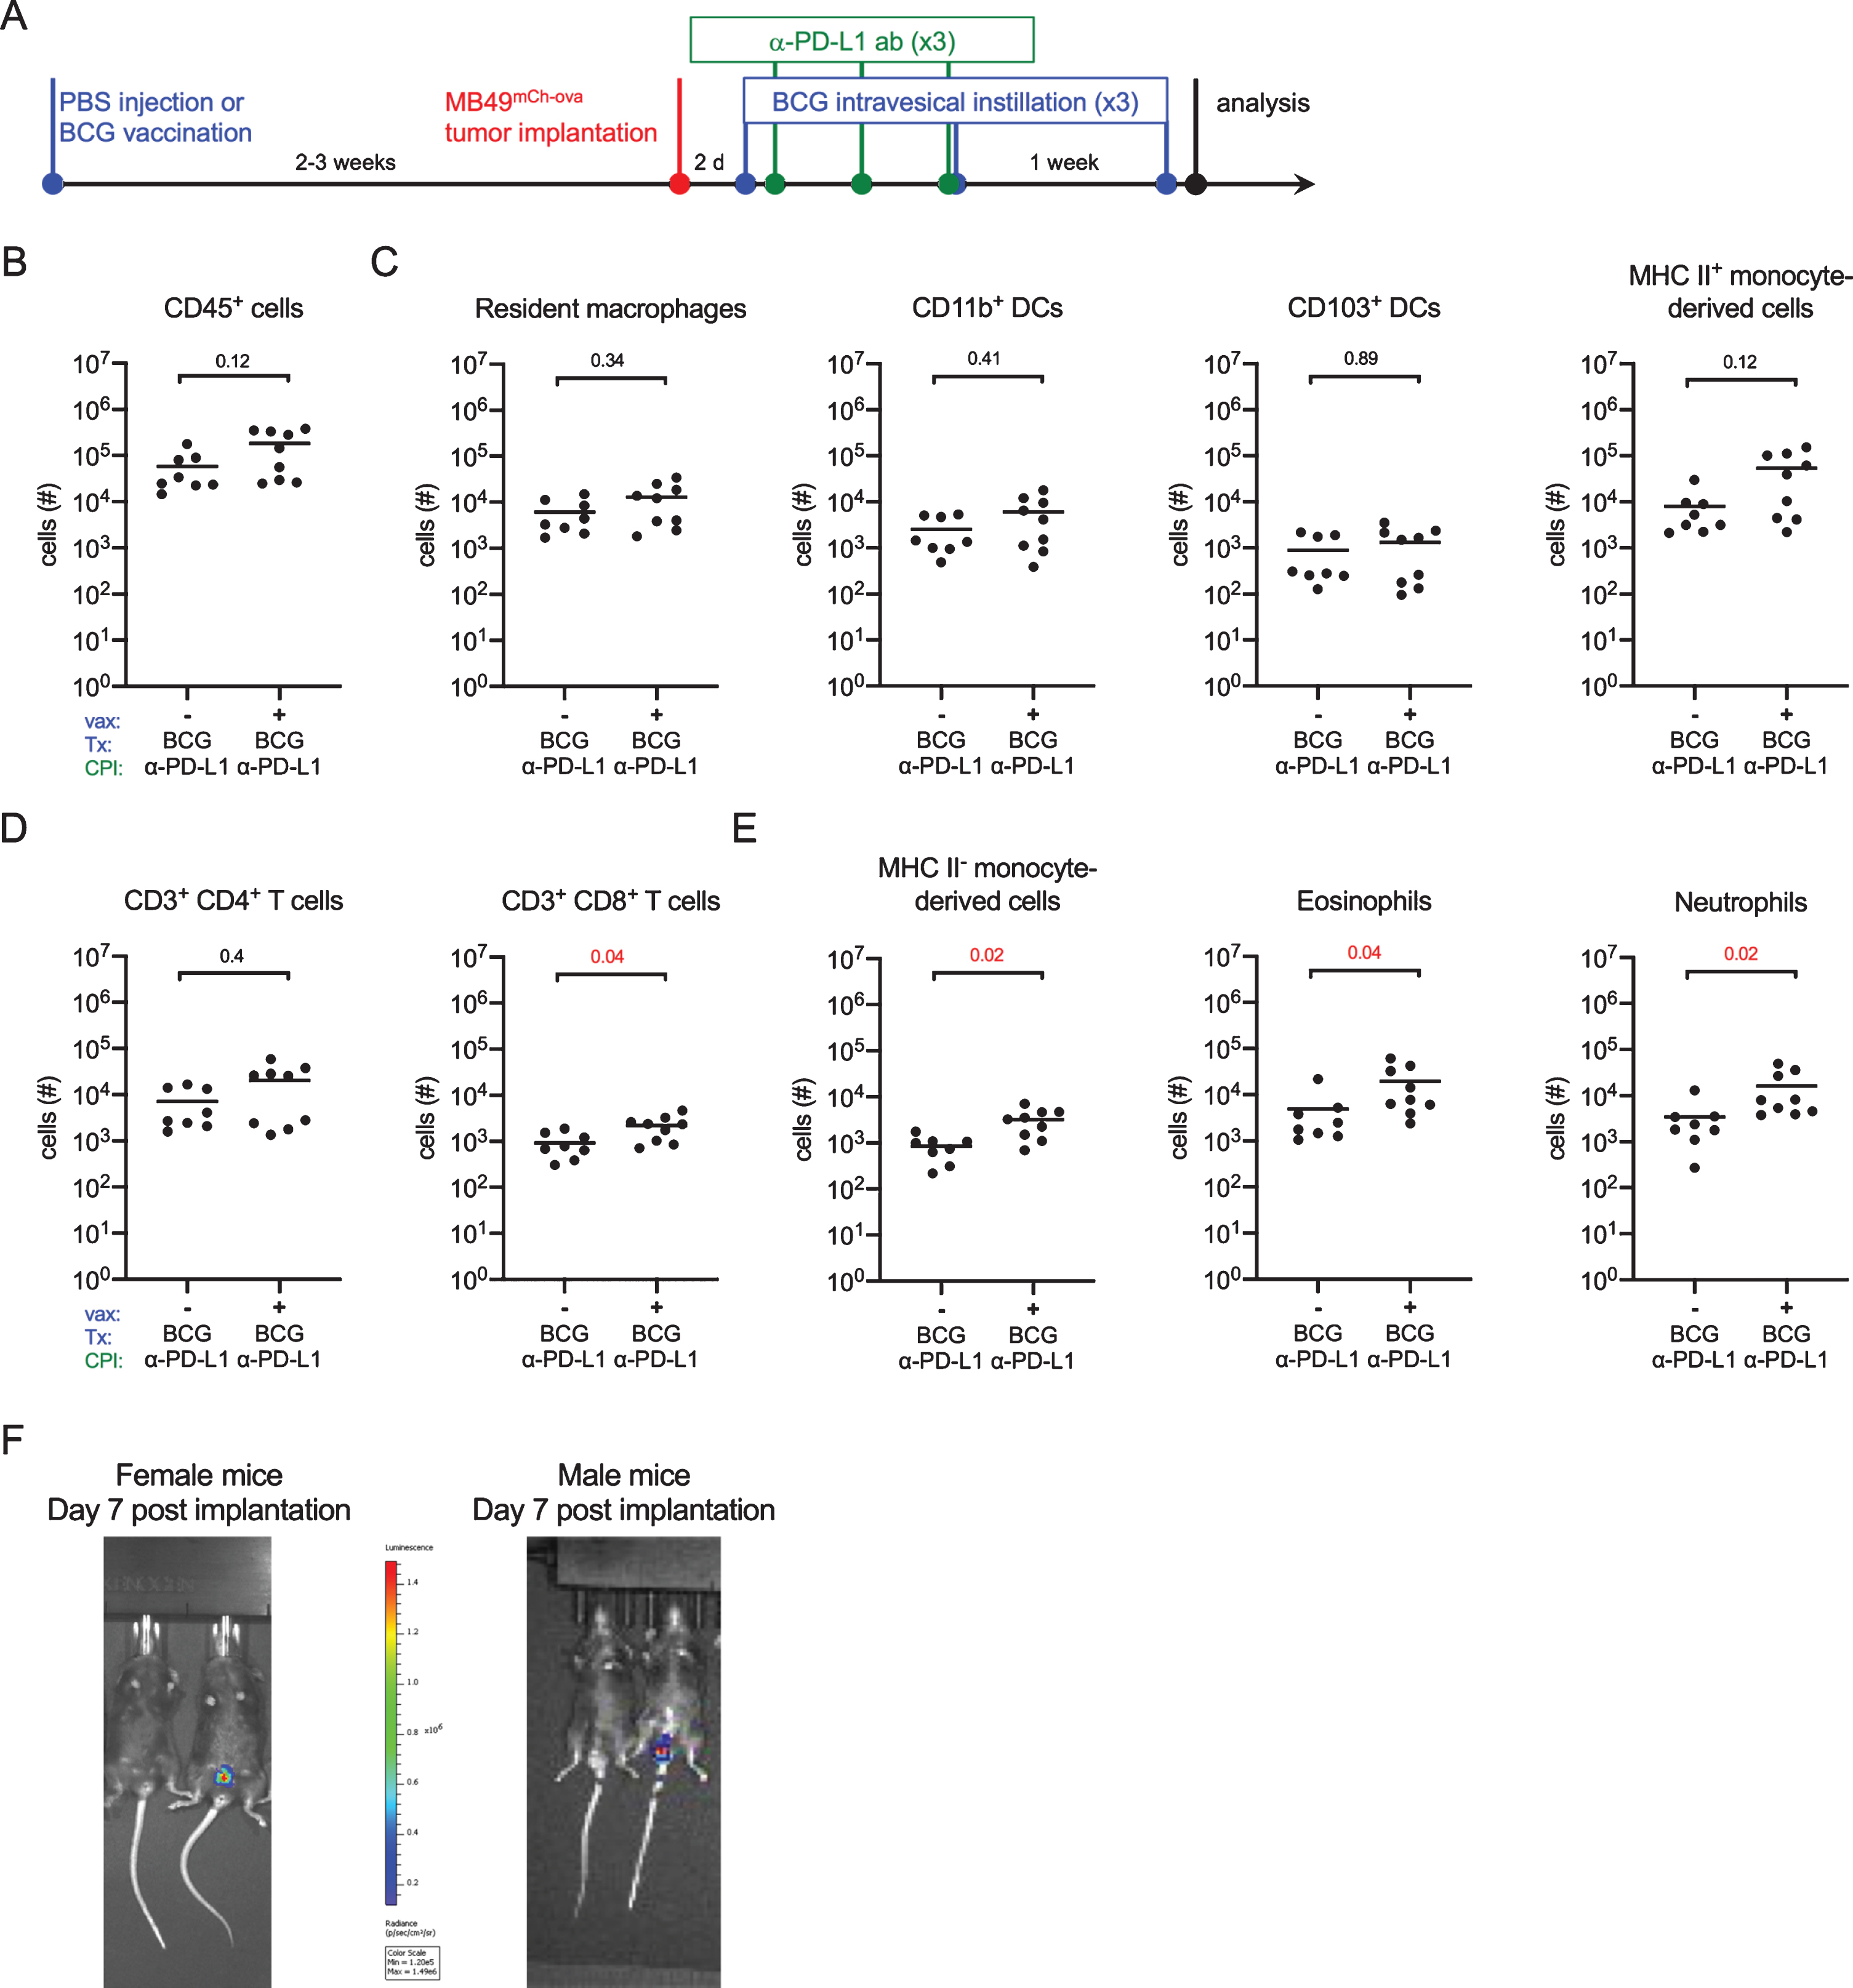 BCG vaccination combined with checkpoint immunotherapy increases innate immune cell, and CD8+ T cell infiltration. (A) Schematic of experiment depicted in B-E. Six week old female C57BL/6 mice were vaccinated with PBS or 3×106 CFU of BCG Connaught and instilled with 2×105 MB49mCh - ova cells 2–3 weeks later. All mice received 5×106 CFU of BCG Connaught intravesically two days post-tumor instillation and then once a week for a total of 3 instillations. On day 3, 6, and 9 post tumor instillation, all the mice received α-PD-L1 immunotherapy (indicated as CPI in the X-axes) by intraperitoneal injection. 24 hours after the last BCG instillation. Bladder immune cell populations were analyzed by flow cytometry. (B-E) Graphs depict total specified immune cell populations. (F) Representative image of in vivo tumor detection in female and male mice 7 days post-tumor implantation. In B-E, data are pooled from 2 experiments, n = 4–5 mice per experiment, animals without tumors by day 7 were excluded from analysis. Each dot represents 1 mouse, lines are medians. Significance was determined using the nonparametric Mann-Whitney test to compare vaccinated to unvaccinated mice for each immune population shown, and the p-values were corrected for multiple testing using the FDR method. All calculated/corrected p-values are shown and those meeting the criteria for statistical significance (p < 0.05) are in red.